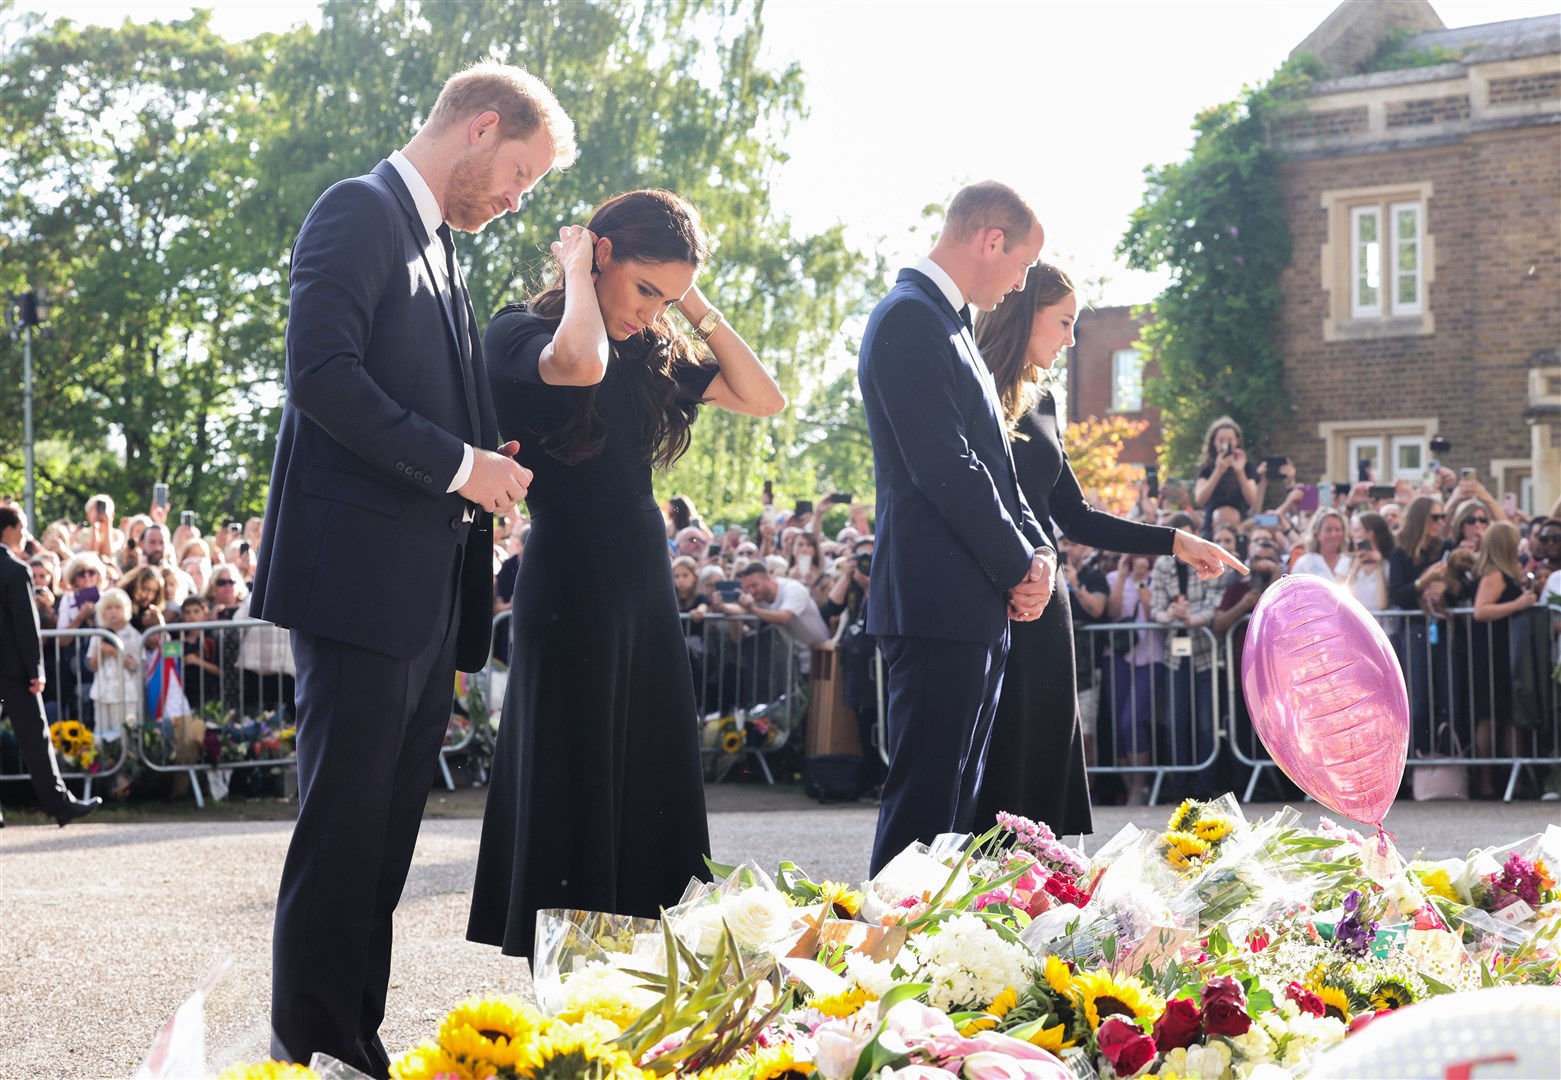 The Duke and Duchess of Sussex, and the Prince and Princess of Wales view floral tributes outside Windsor Castle (Chris Jackson/PA)